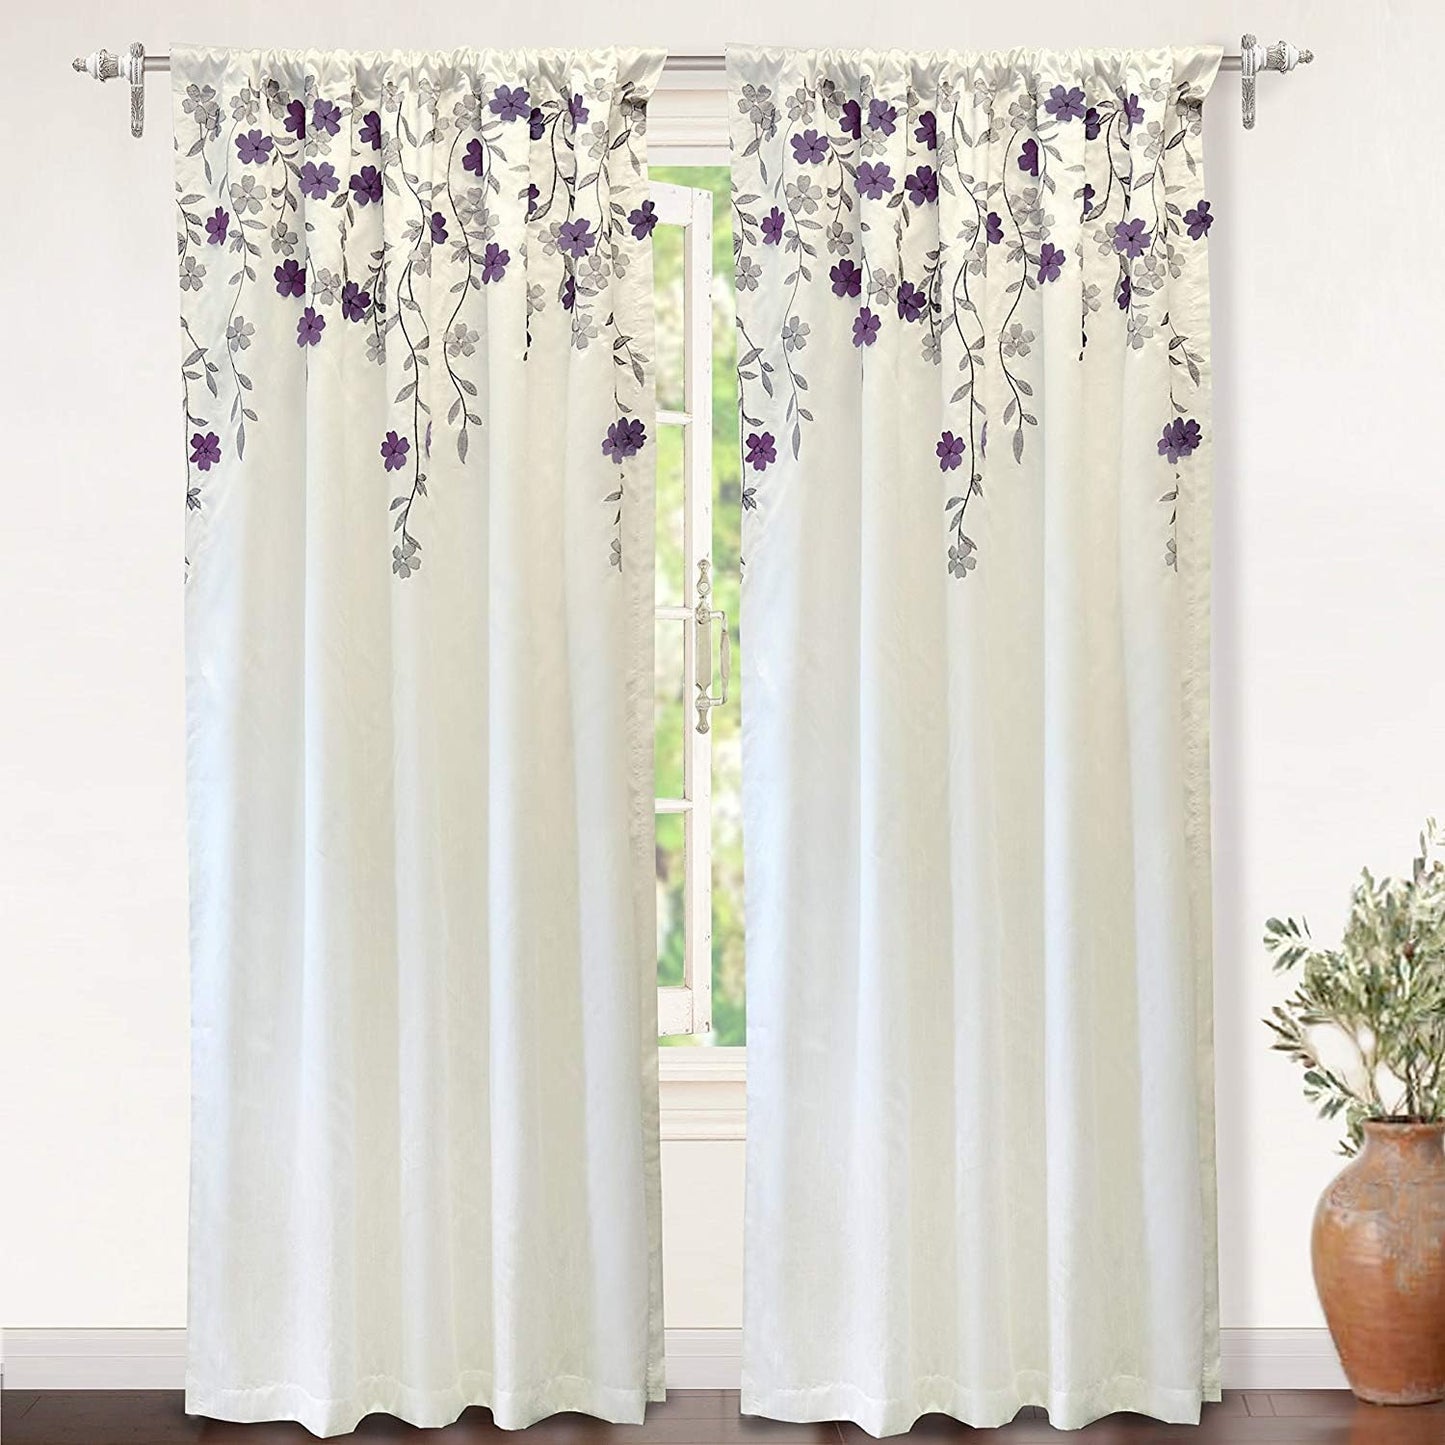 Driftaway Aubree Weeping Flower Print Thermal Room Darkening Privacy Window Curtain for Bedroom Living Room Rod Pocket 2 Panels 52 Inch by 84 Inch Blue  DriftAway One Panel Ivory Purple 50”X84” 